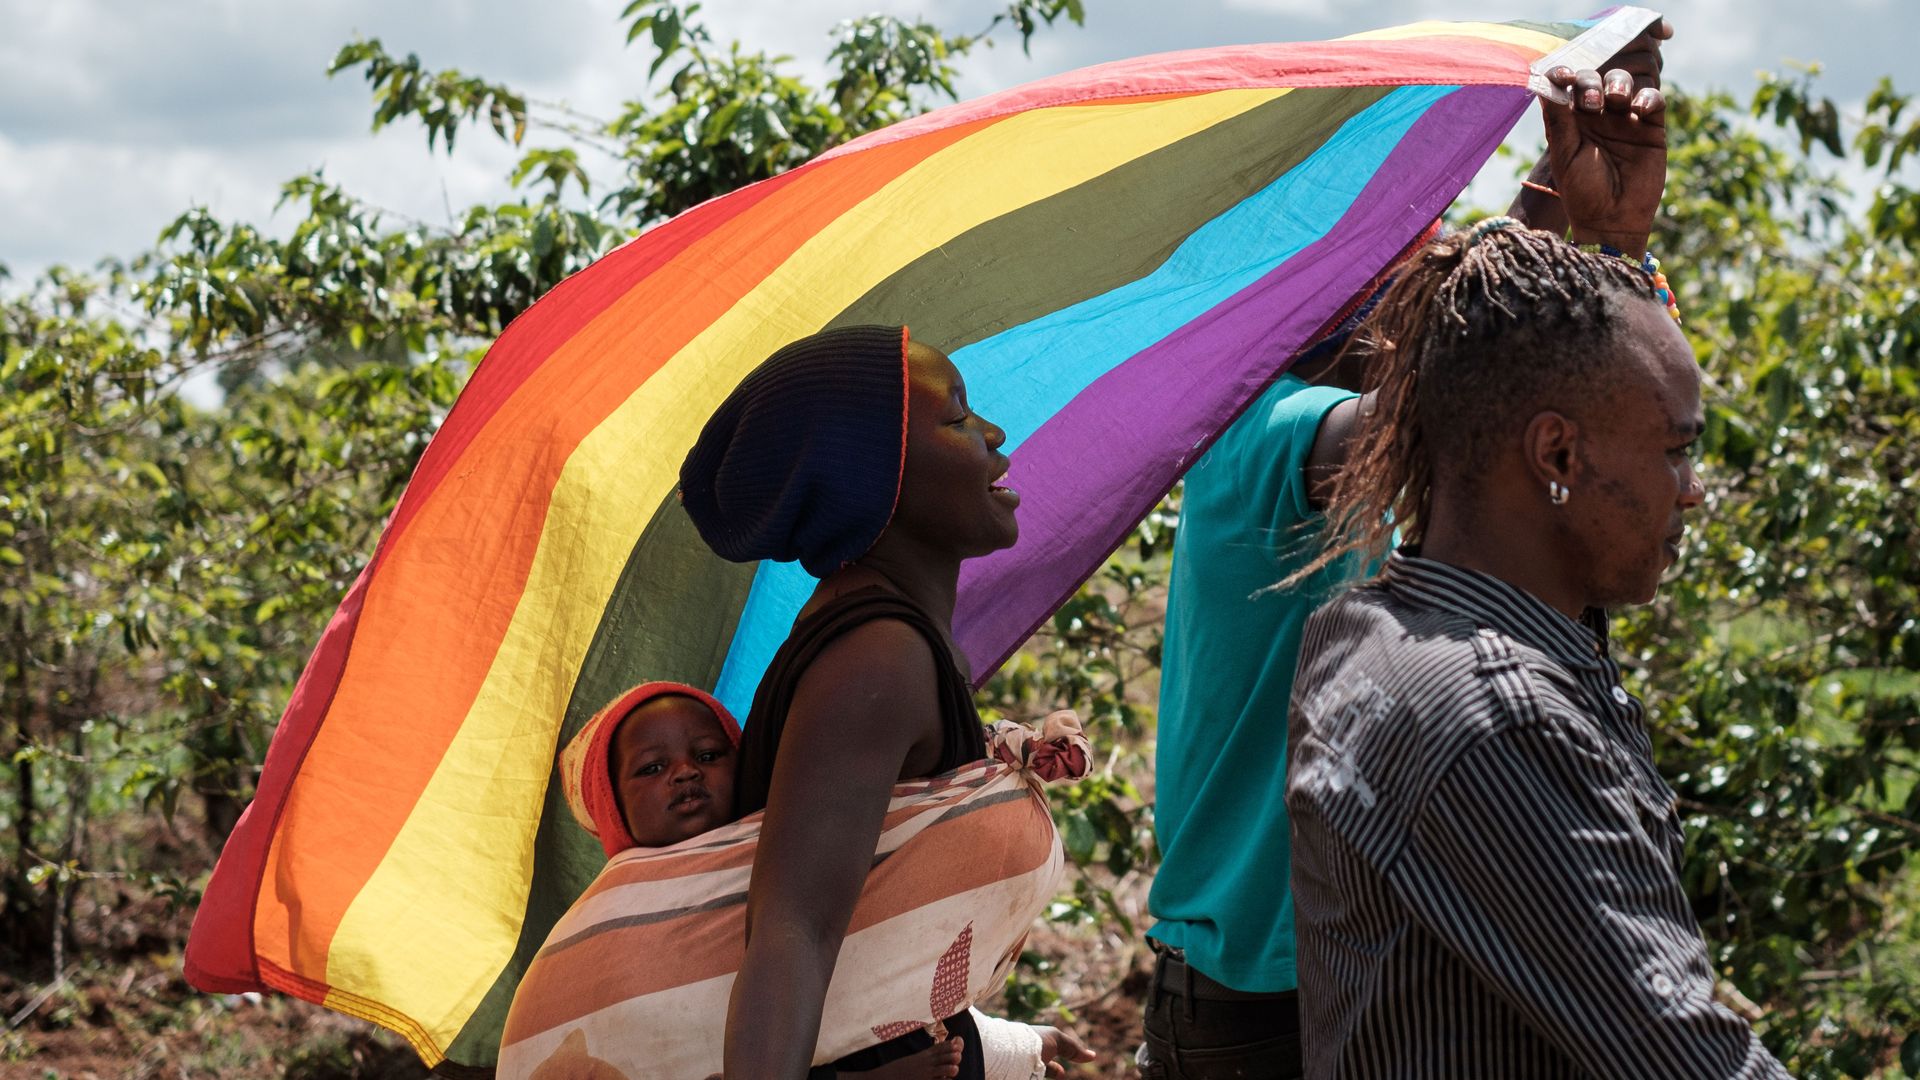 In this image, a man carries a rainbow flag while a woman carrying a baby in a papoose follows behind him.